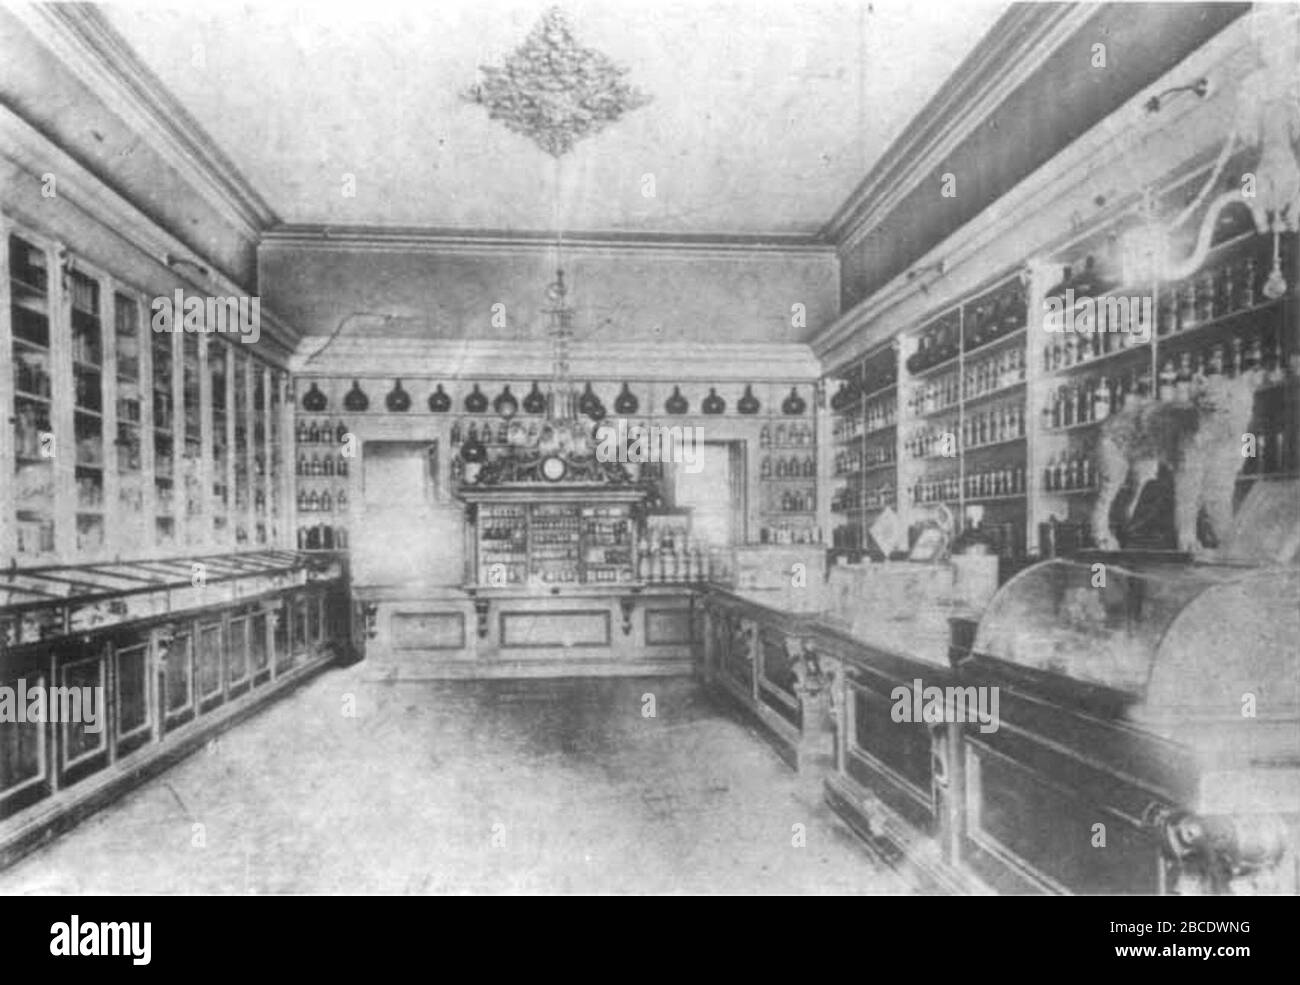 'English: Interior of Randall’s Drug Store, now the Niagara Apothecary, a pharmacy museum and National Historic Site of Canada.; 1900s date QS:P,+1900-00-00T00:00:00Z/8; Cropped from A Professional Keeping Shop: The Nineteenth-Century Apothecary, figure 2. Collection of the Niagara Apothecary.; Unknown author; ' Stock Photo